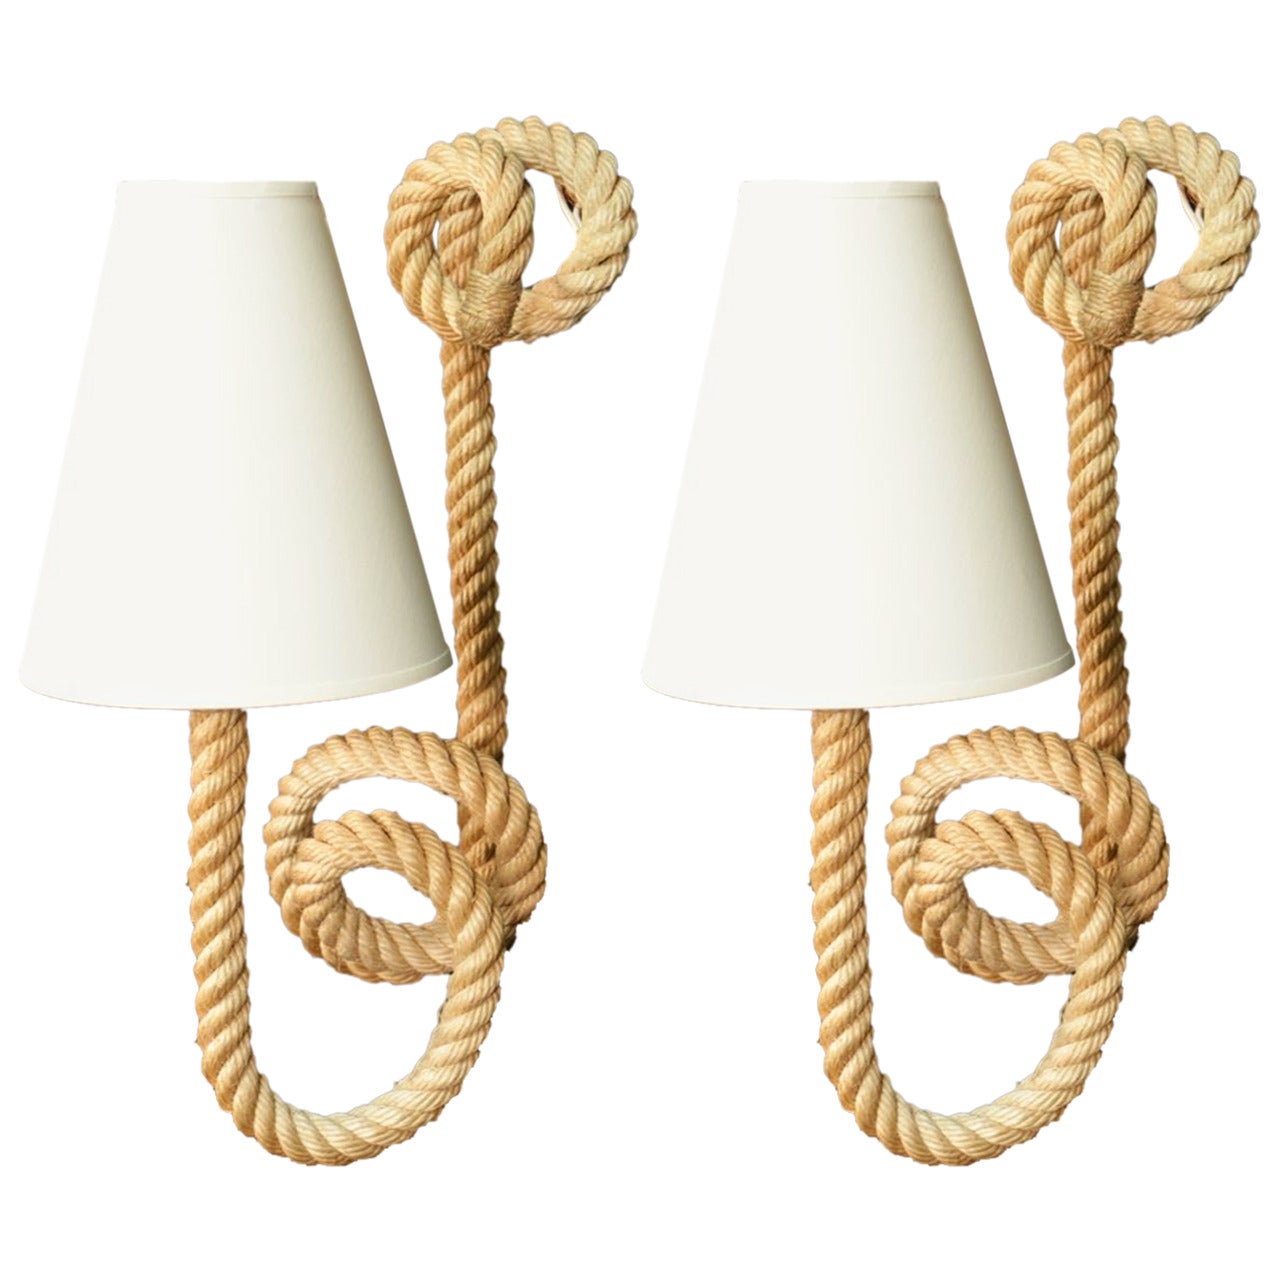 Large Pair of 1950s Sconces by Adrien Audoux and Frida Minet for Ecole de Nice